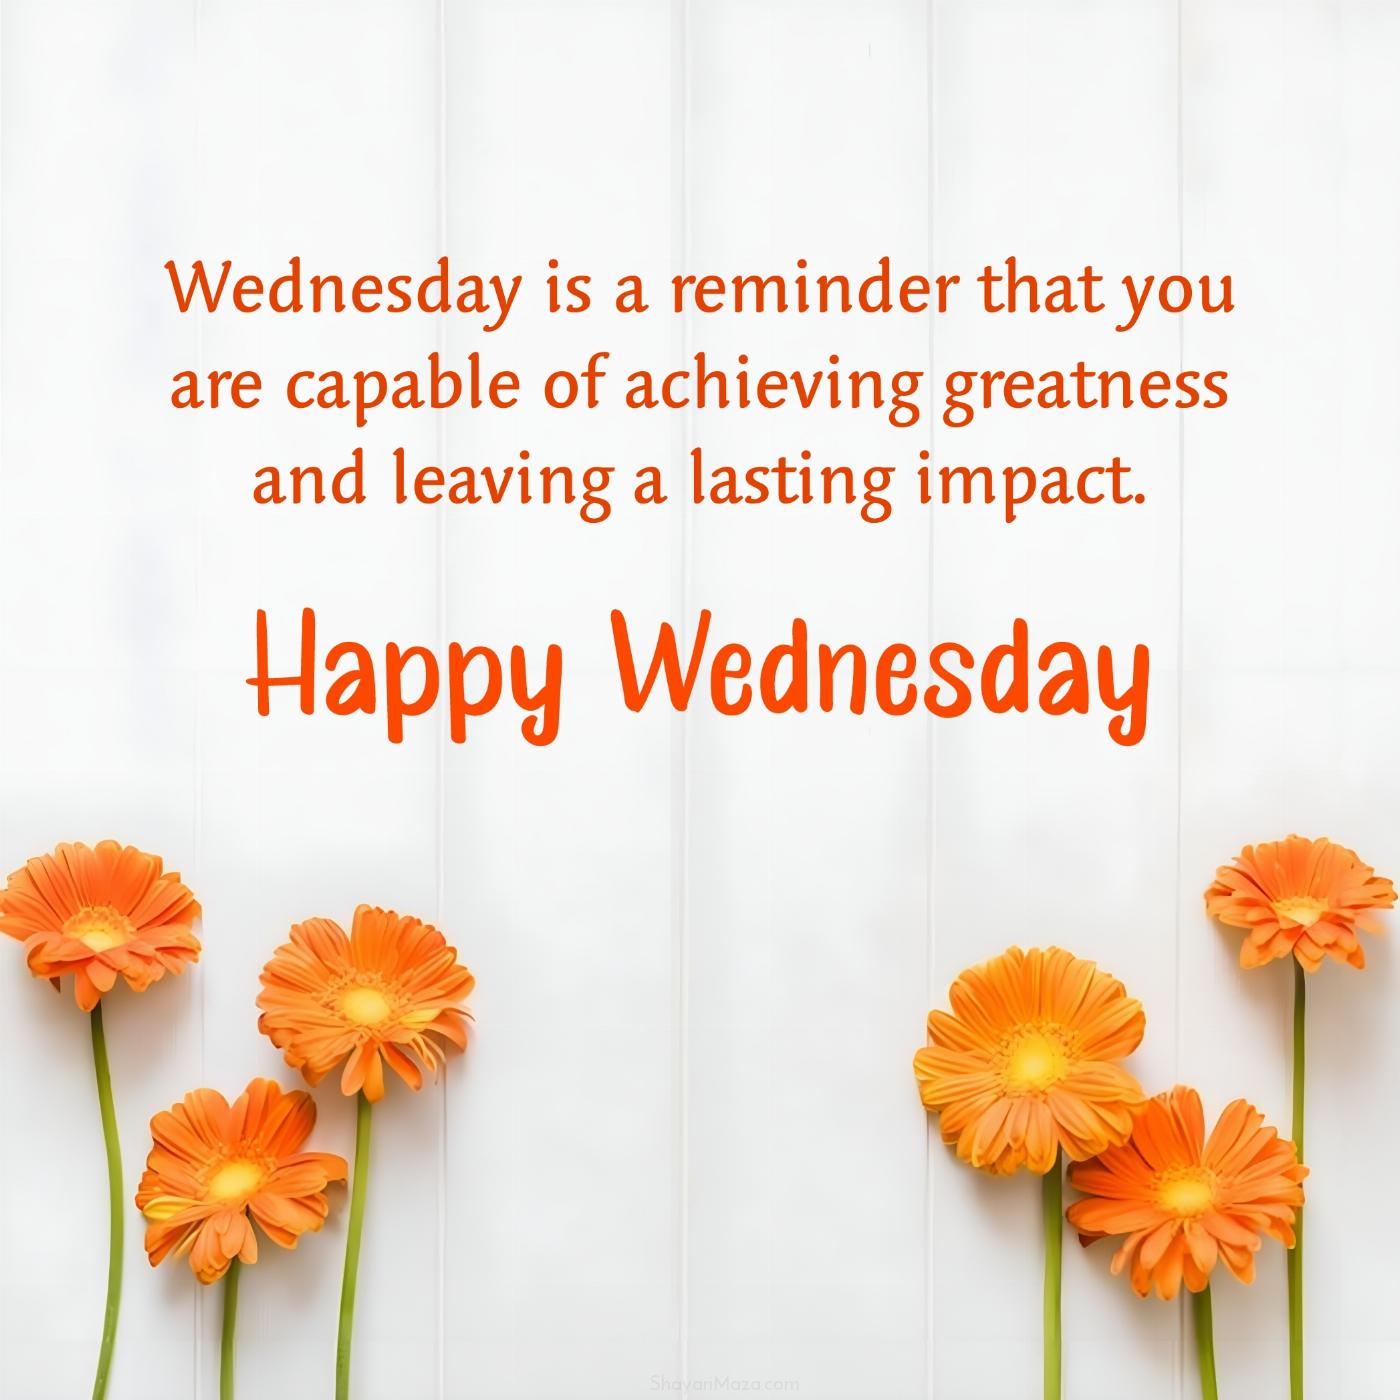 Wednesday is a reminder that you are capable of achieving greatness